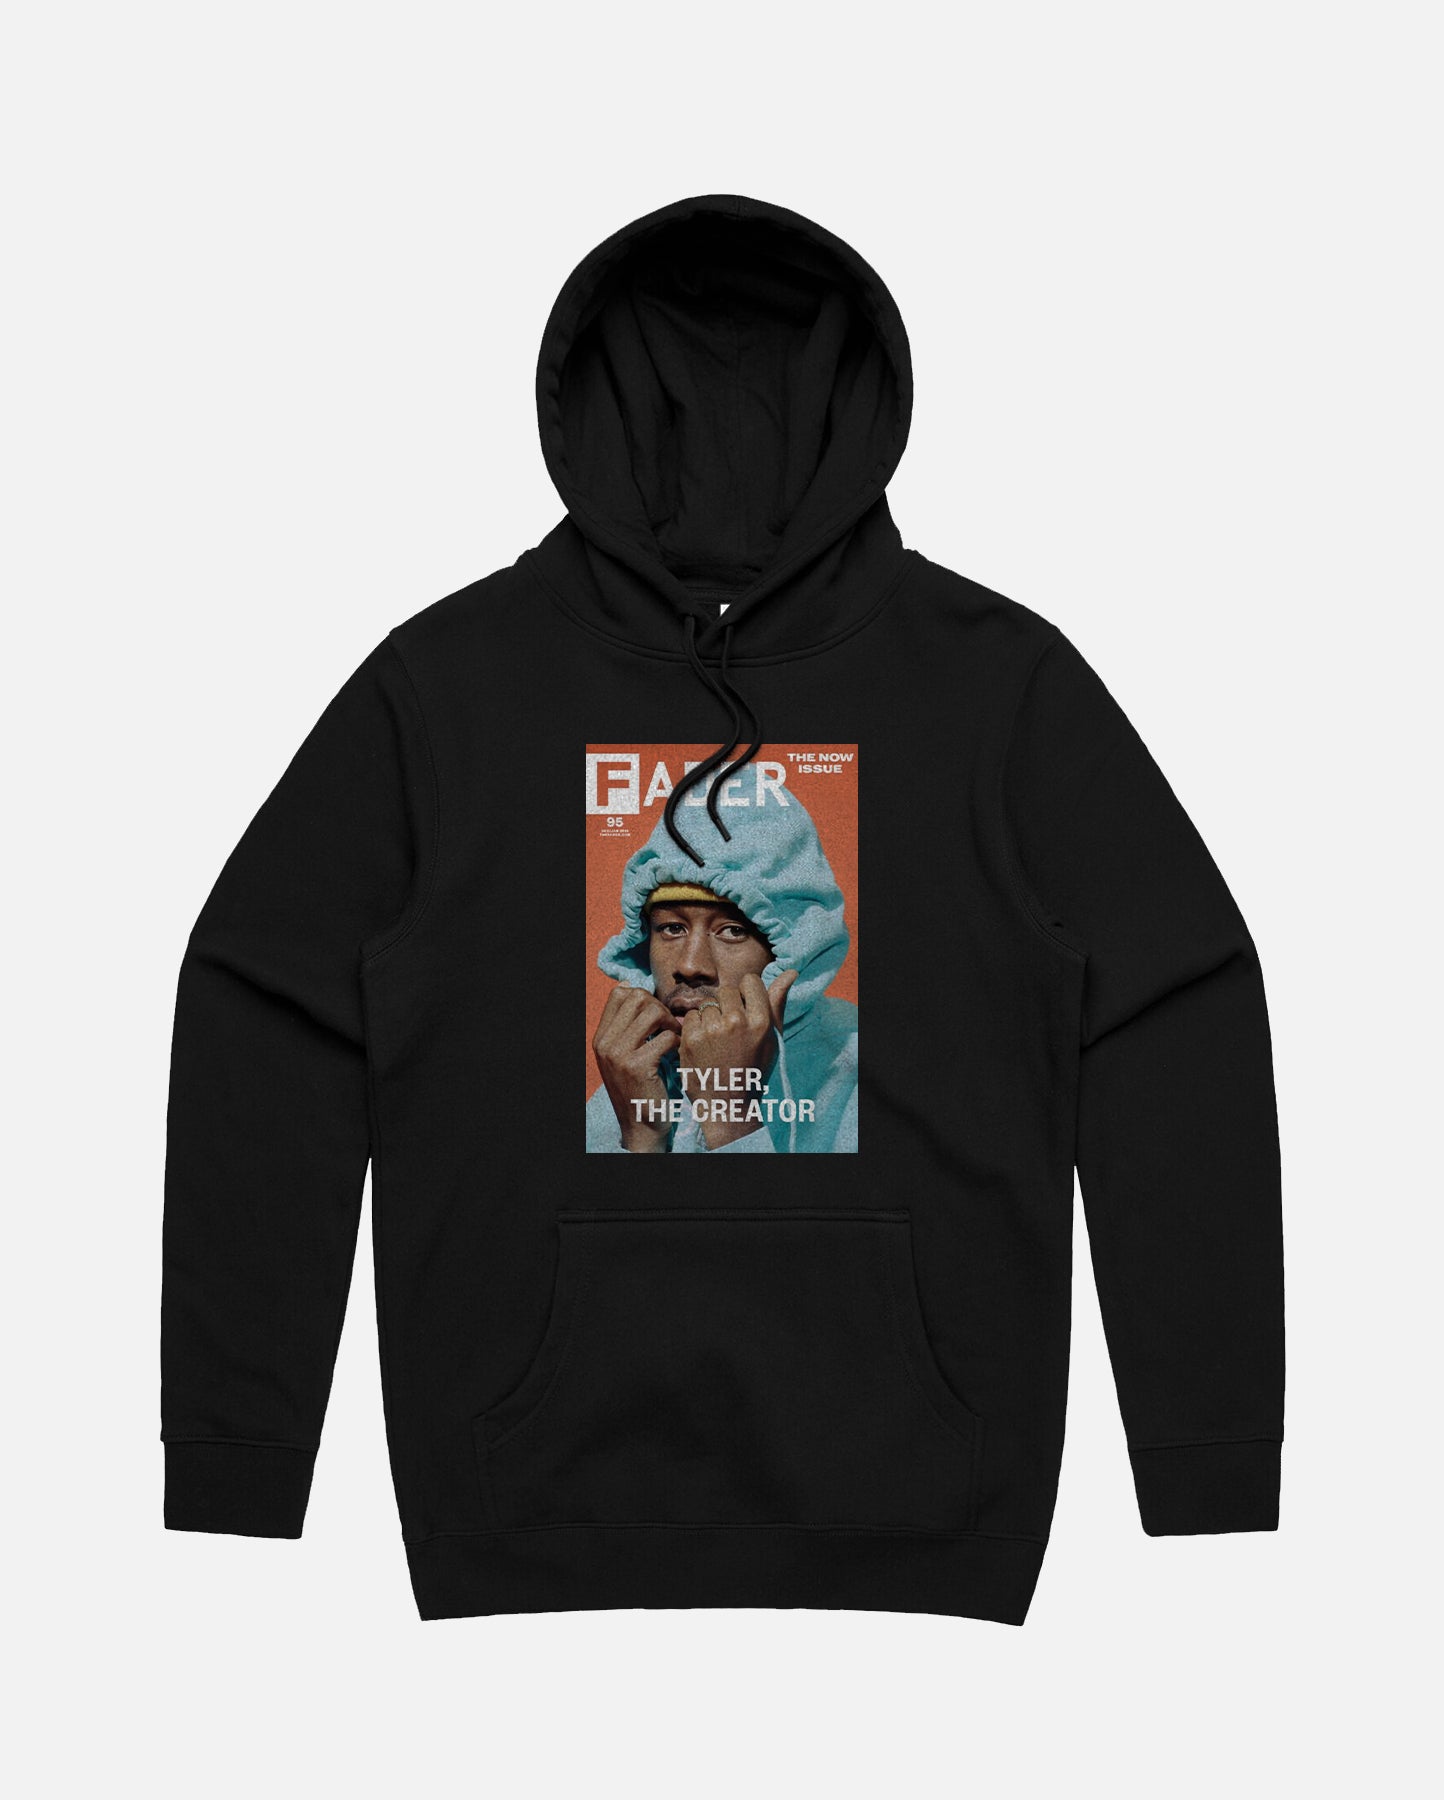 The FADER Shop - Official Merch, Posters, and Magazines